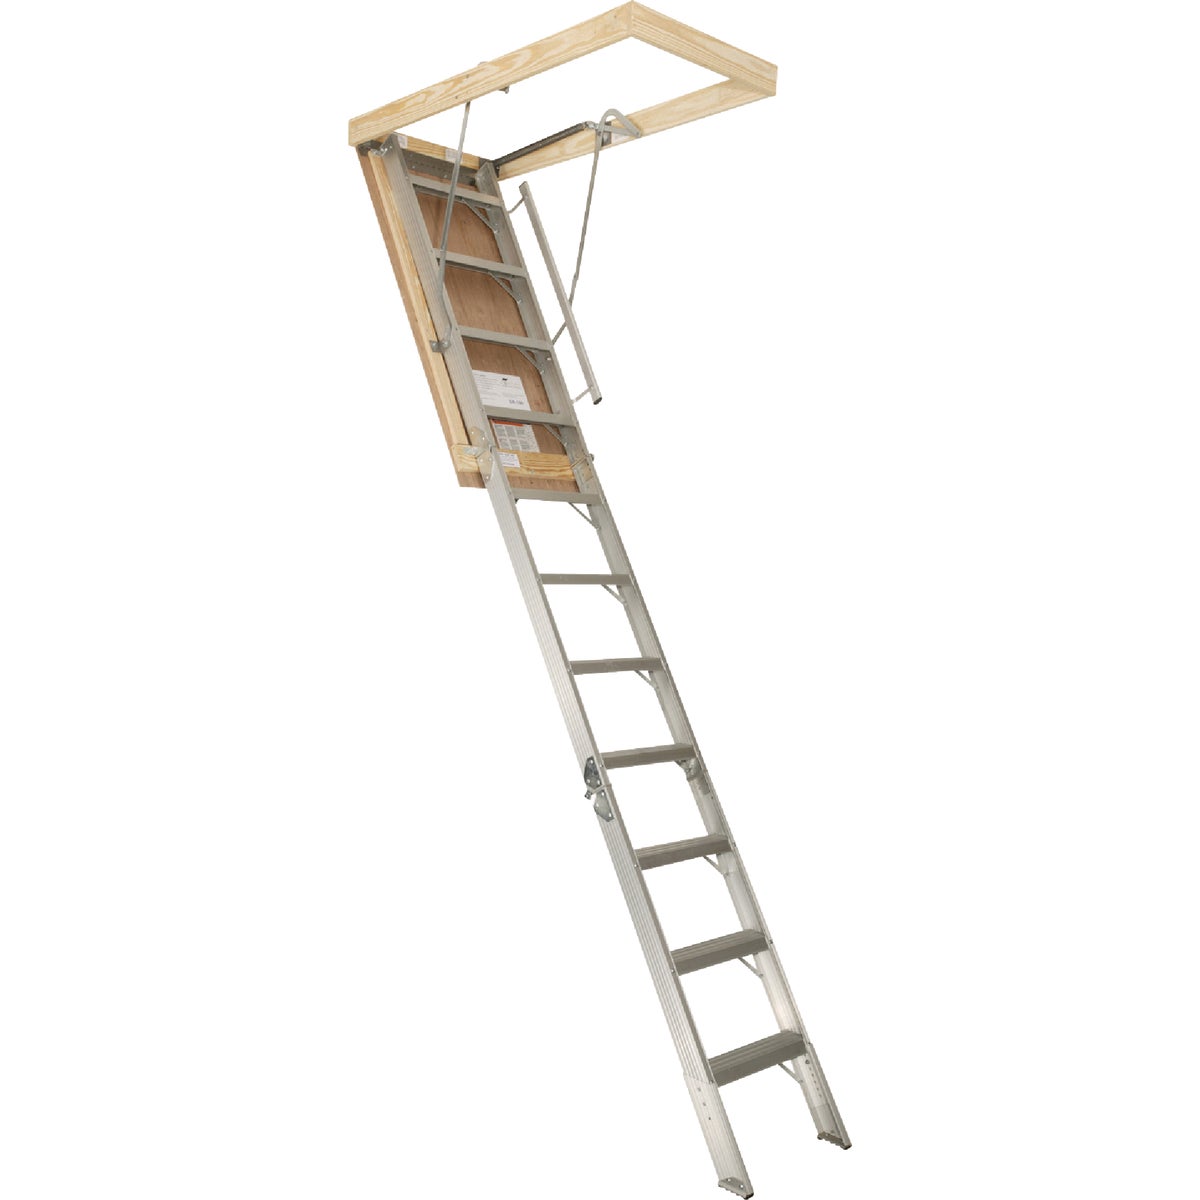 Louisville Elite 7 Ft. 8 In. to 10 Ft. 3 In. 22-1/2 In. x 54 In. Aluminum Attic Stairs, 375 Lb. Load